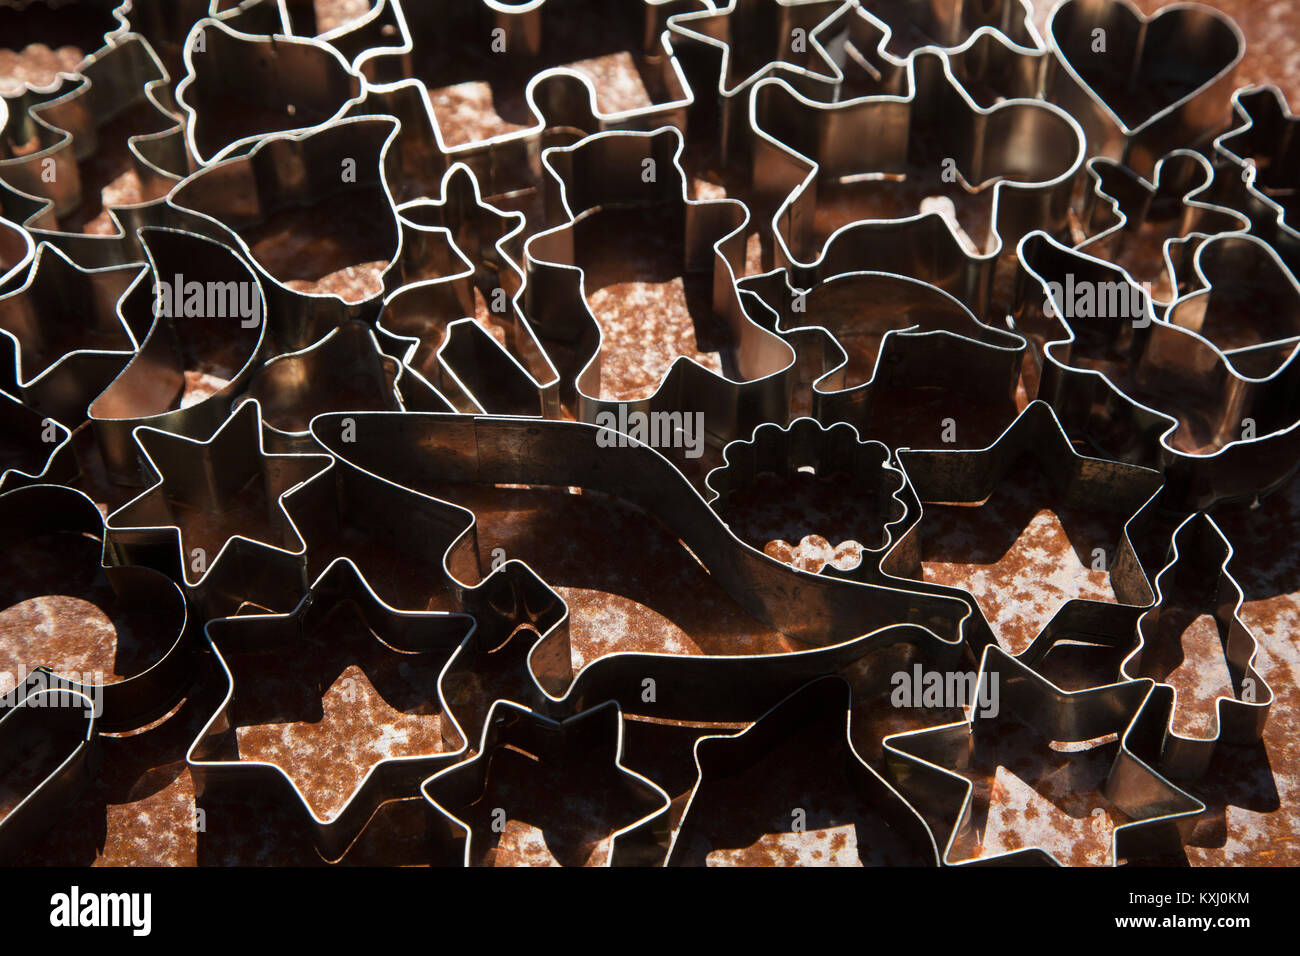 Full frame shot of various cookie cutters on table Stock Photo